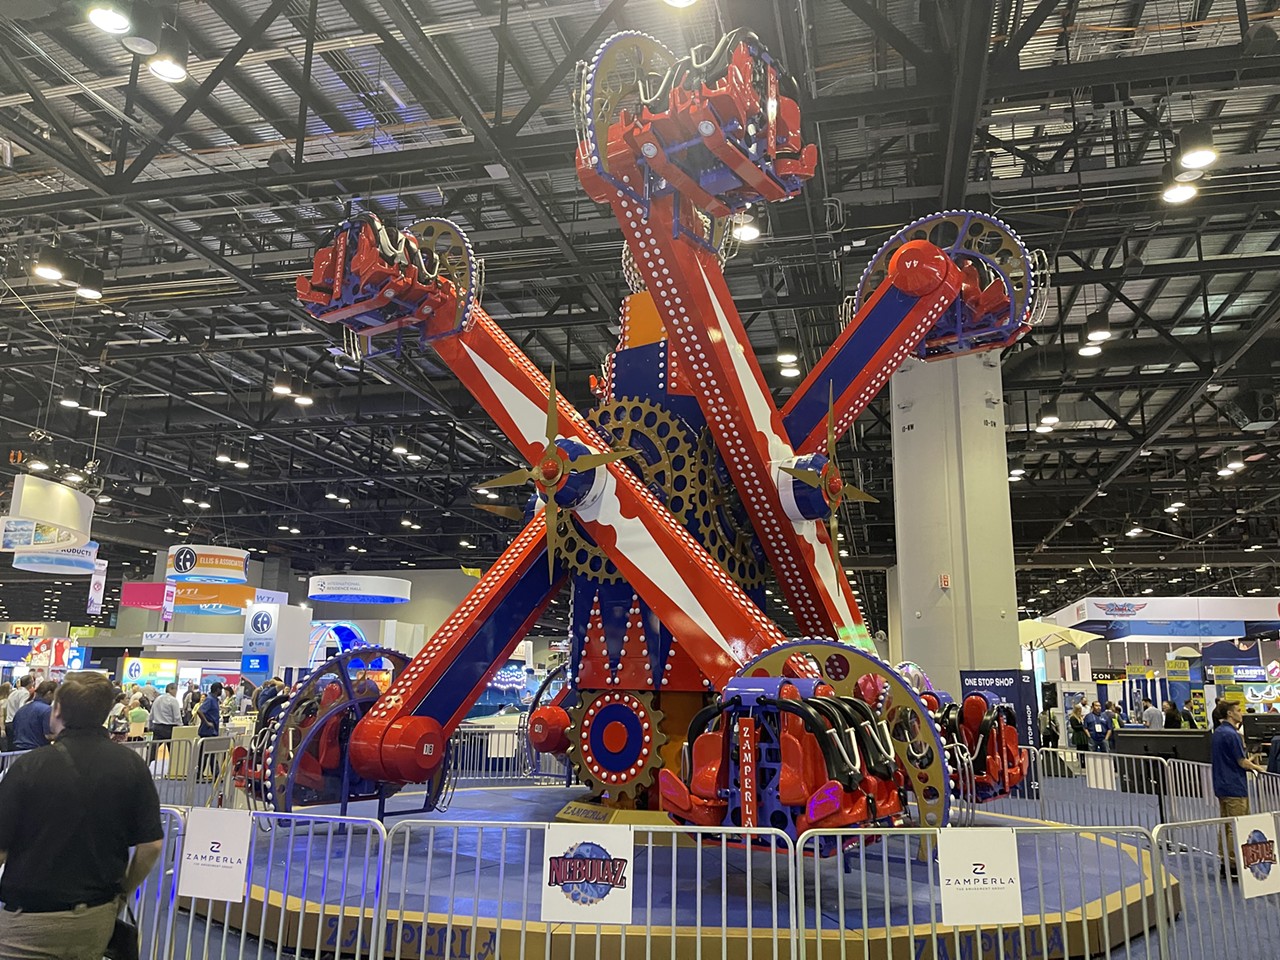 All the new rides, coasters and games we saw at IAAPA